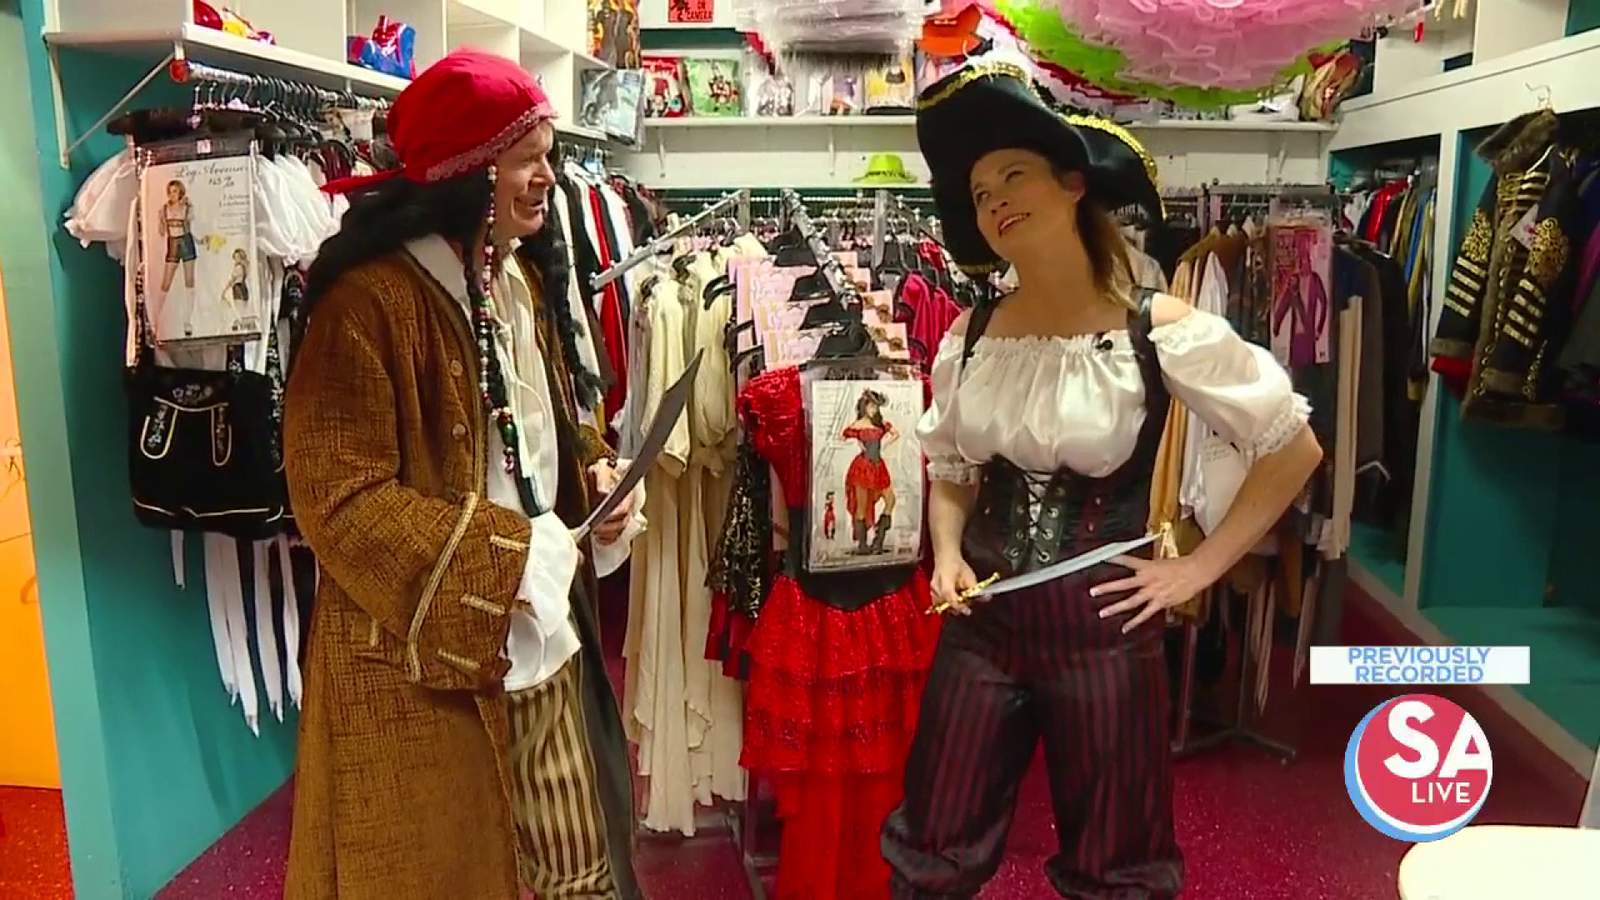 Support Local: Gibson Costume Shop is open for business